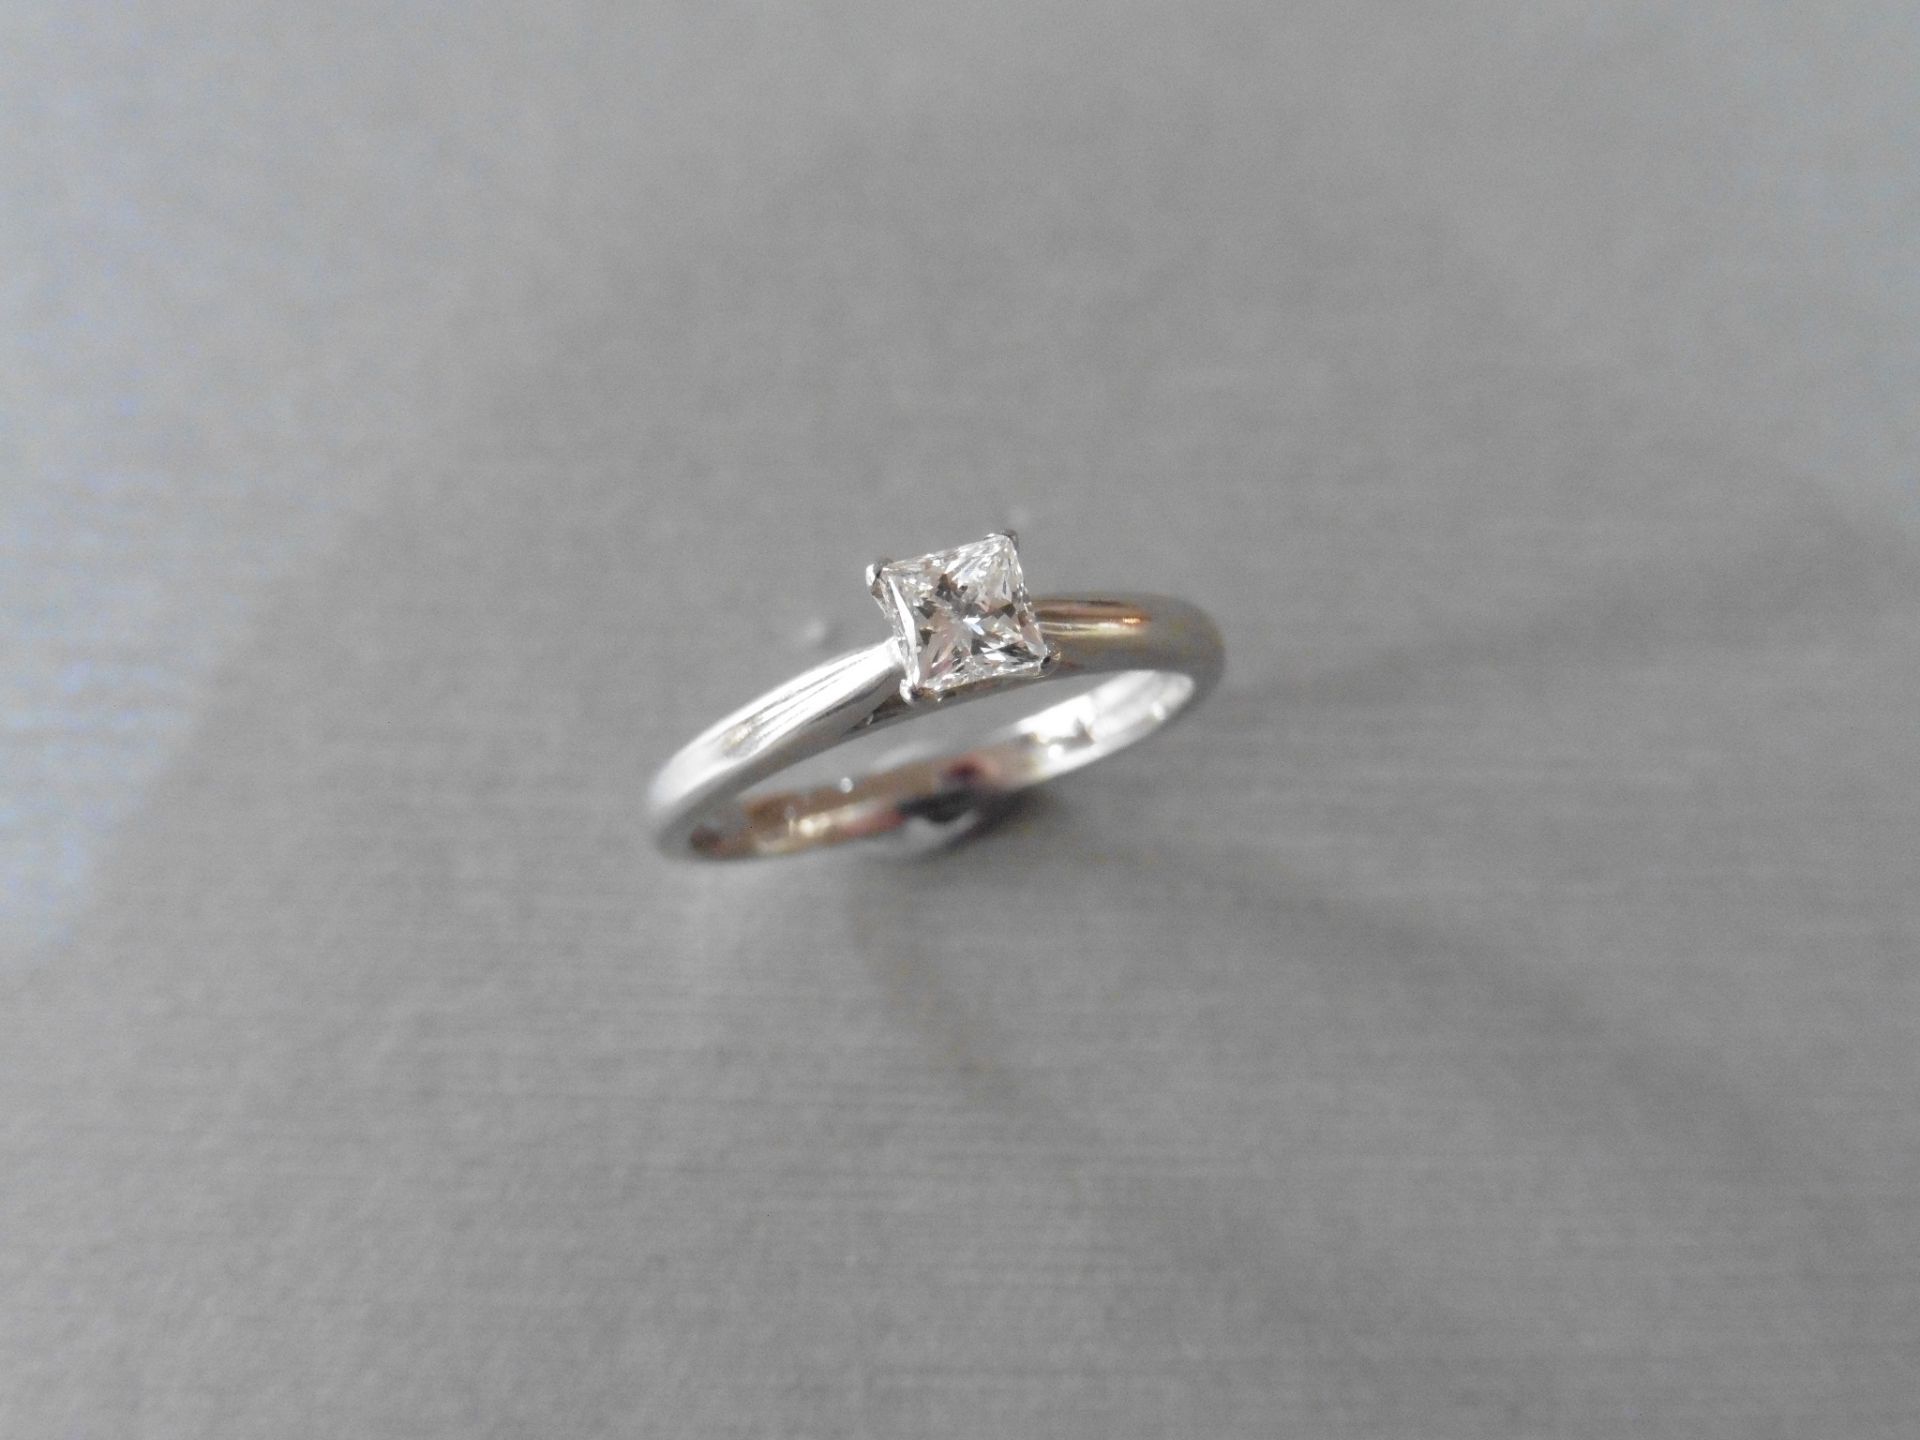 0.32ct diamond solitaire ring set with a princess cut diamond of I colour and VS clarity. 18Ct white